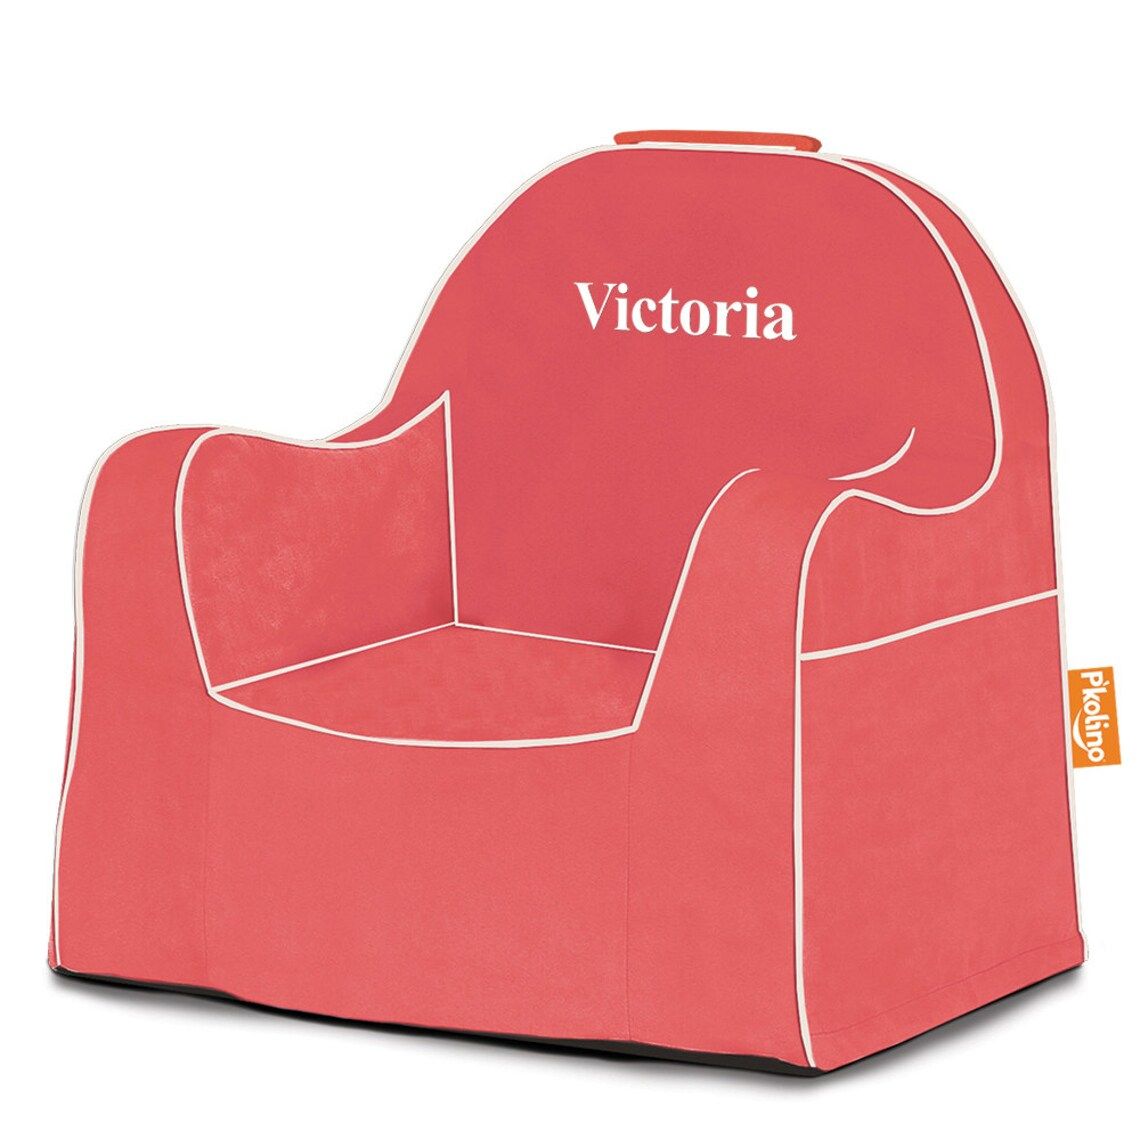 coral kid chair with white piping and Victoria embroidered on headrest